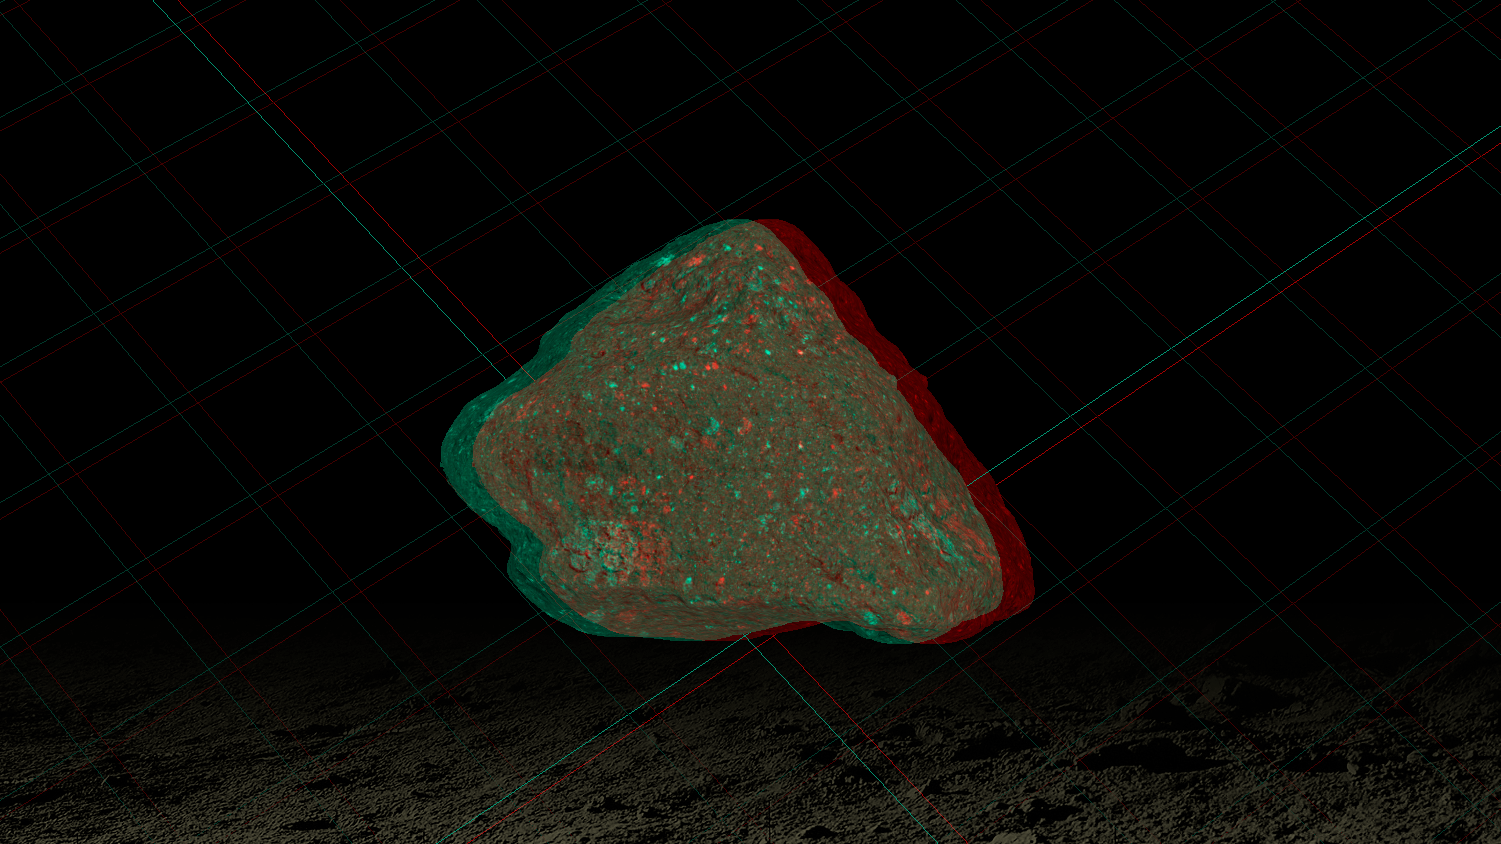 Apollo 11 lunar sample 10021 is seen in the 3D, one of several options available on the Astromaterials 3D website.